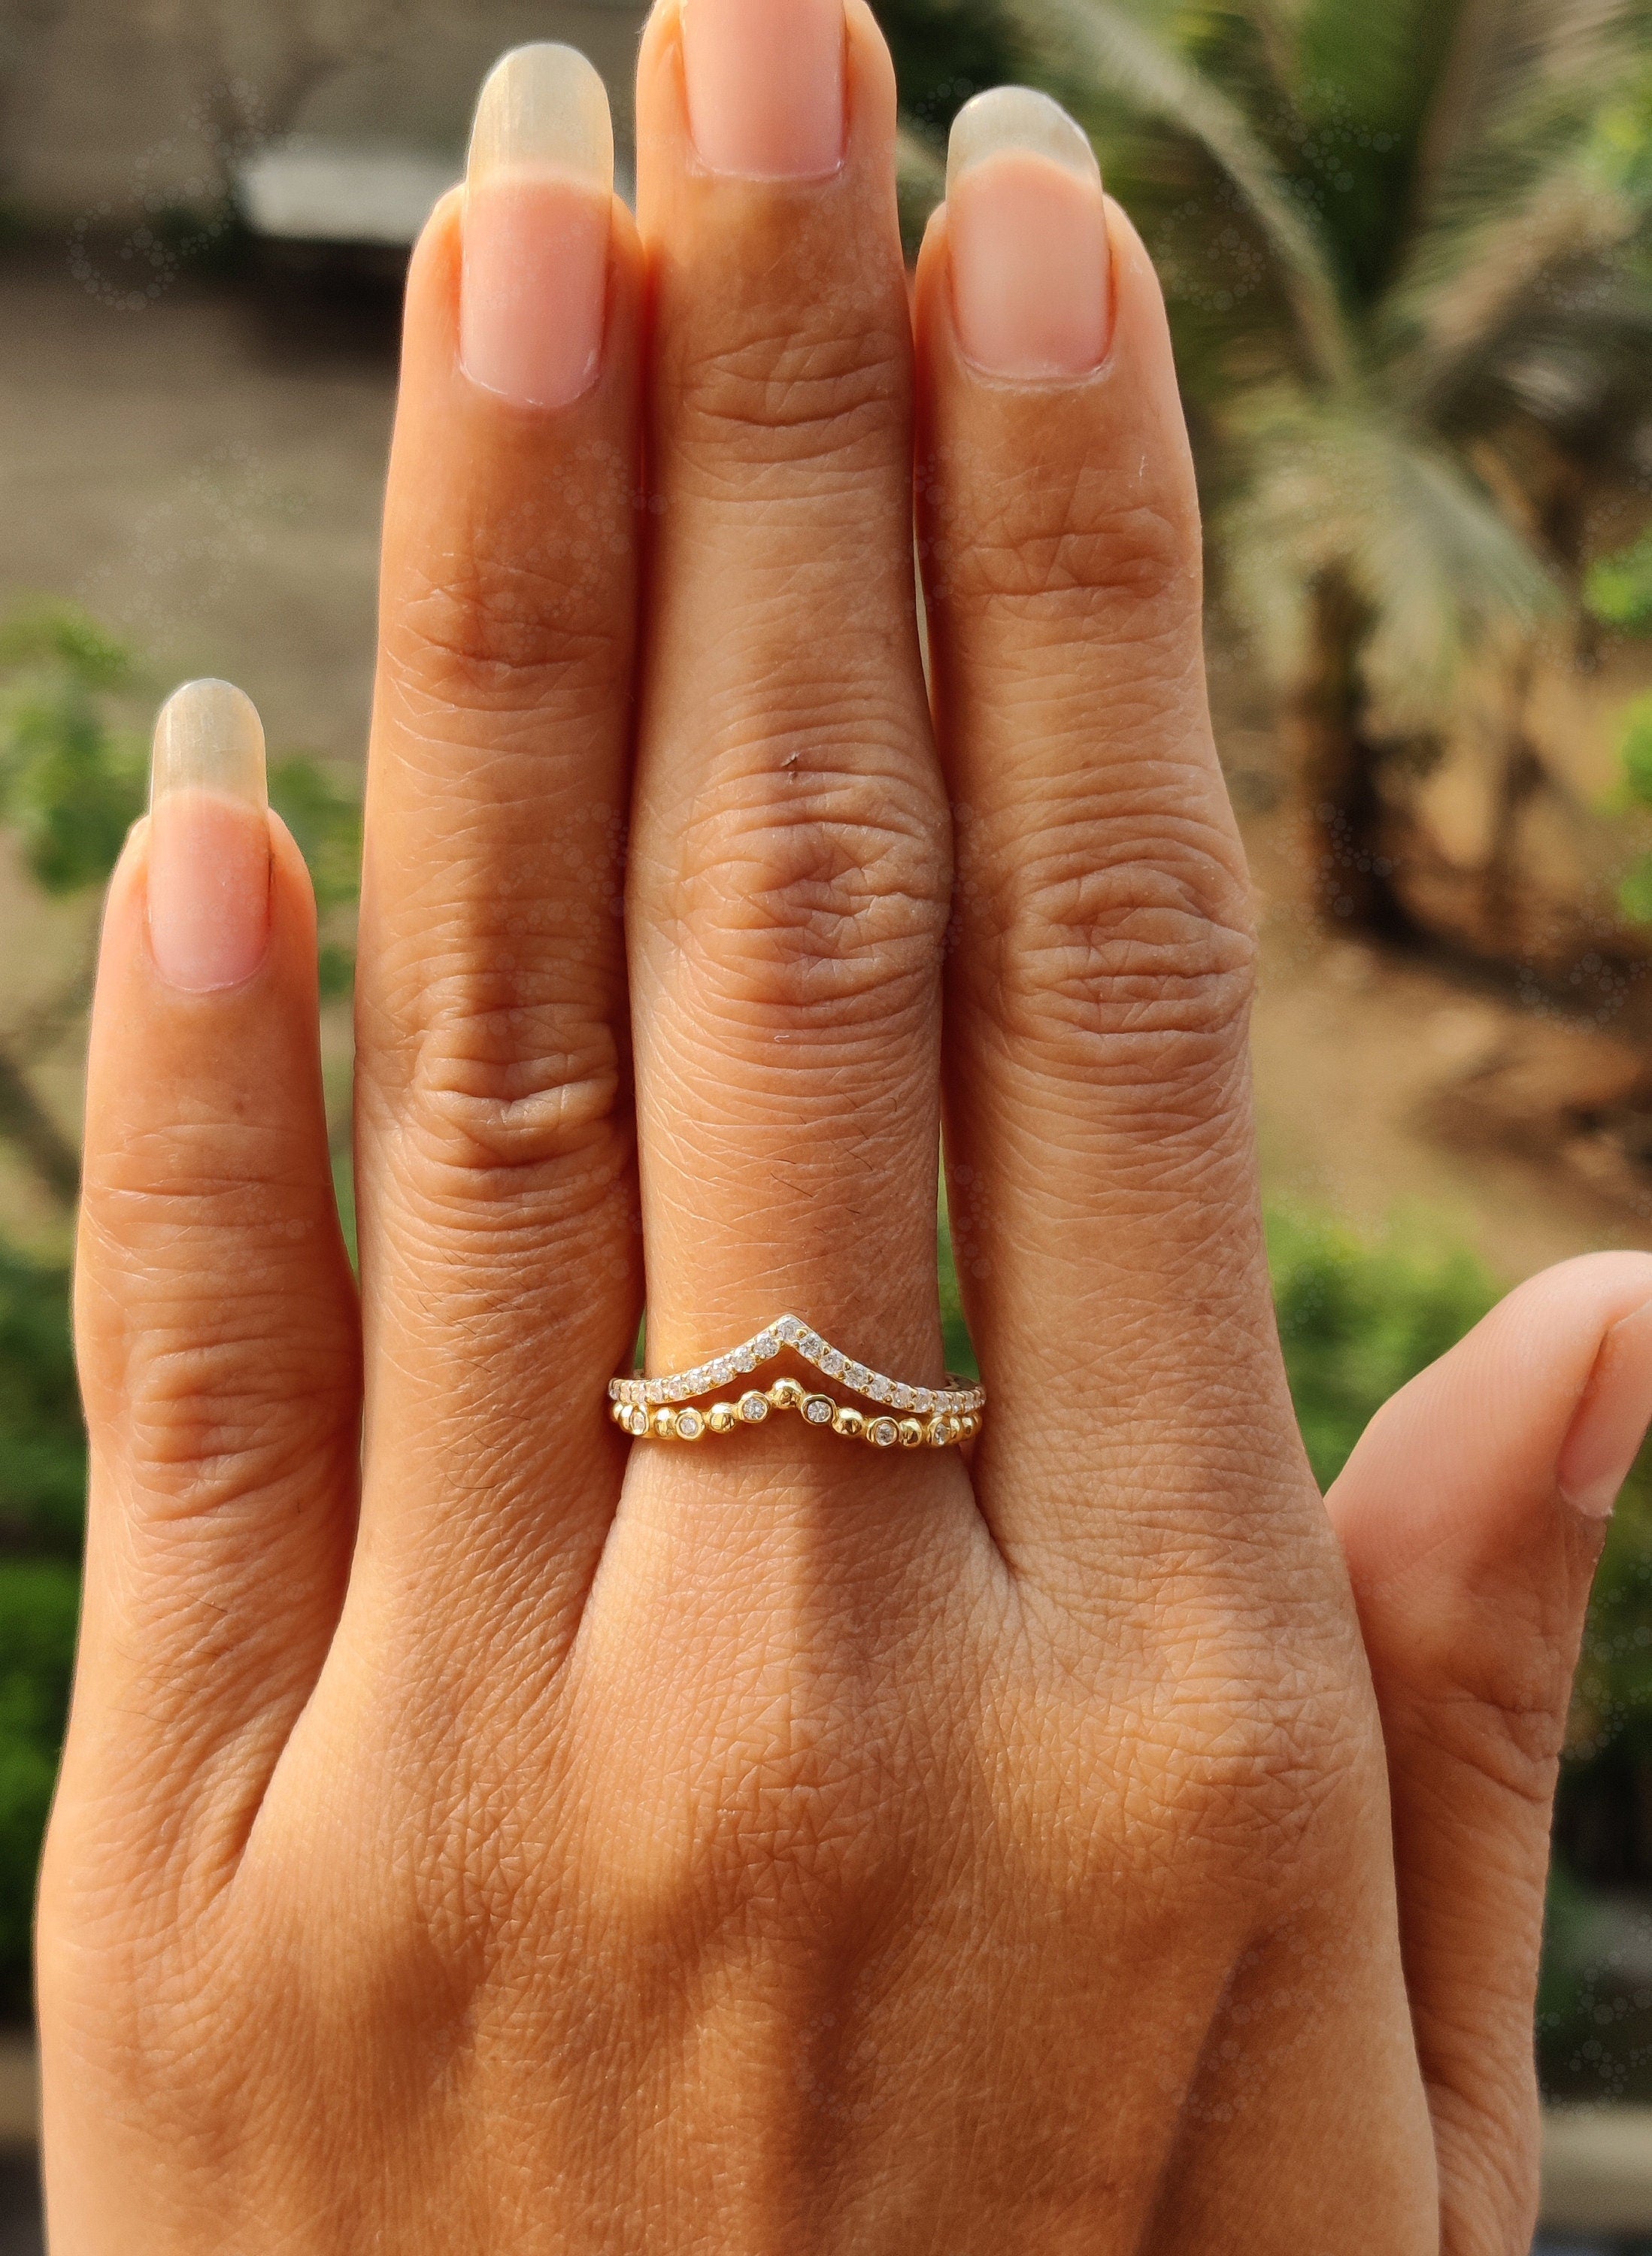 Silver and Gold Chevron Ring Set with Moissanite - Minimalist Stacking and Wedding Band